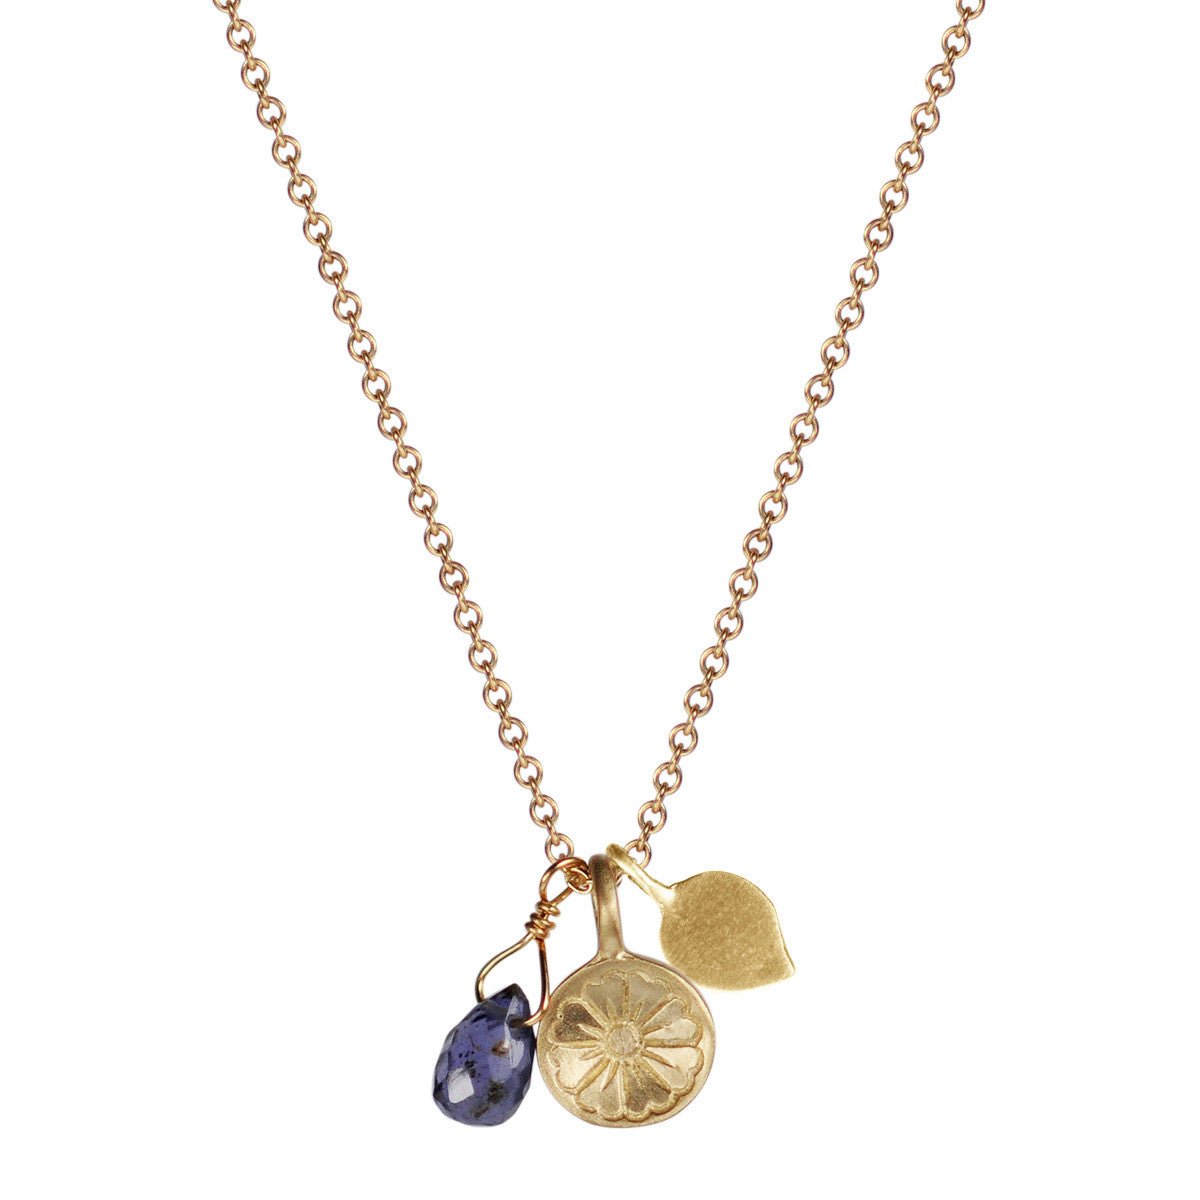 10K Gold Flower Trinket on Chain with Lotus Petal and Iolite Bead